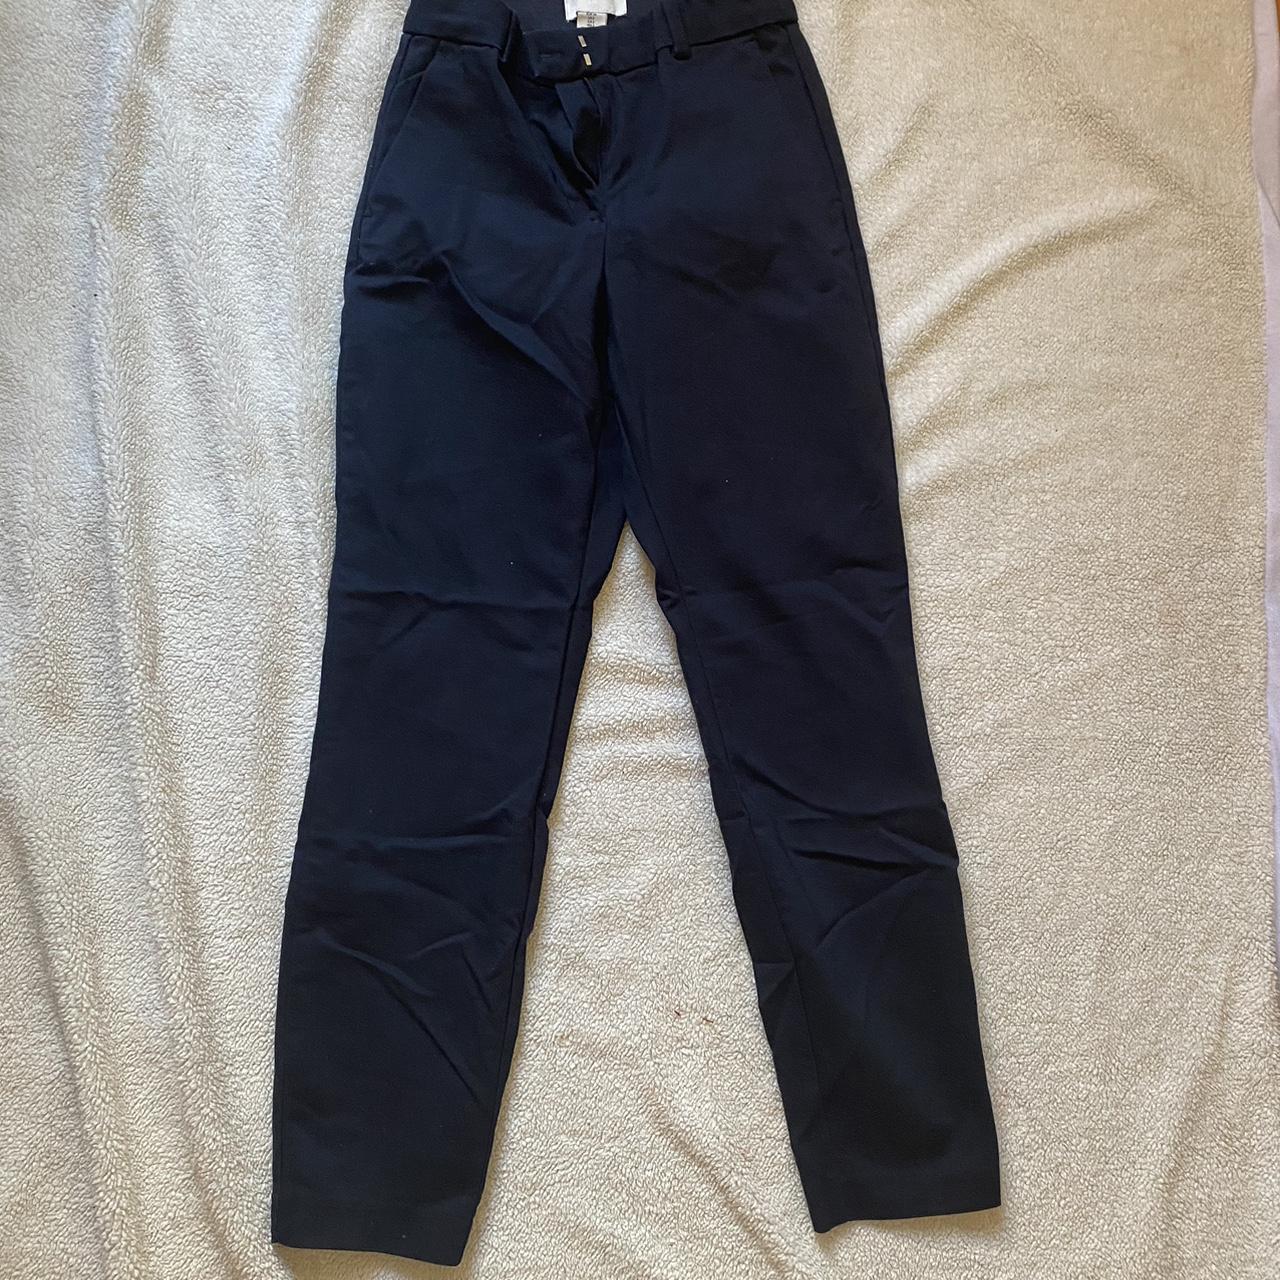 Dark Navy Blue Dress Pants WILL BE WASHED, IRONED/... - Depop